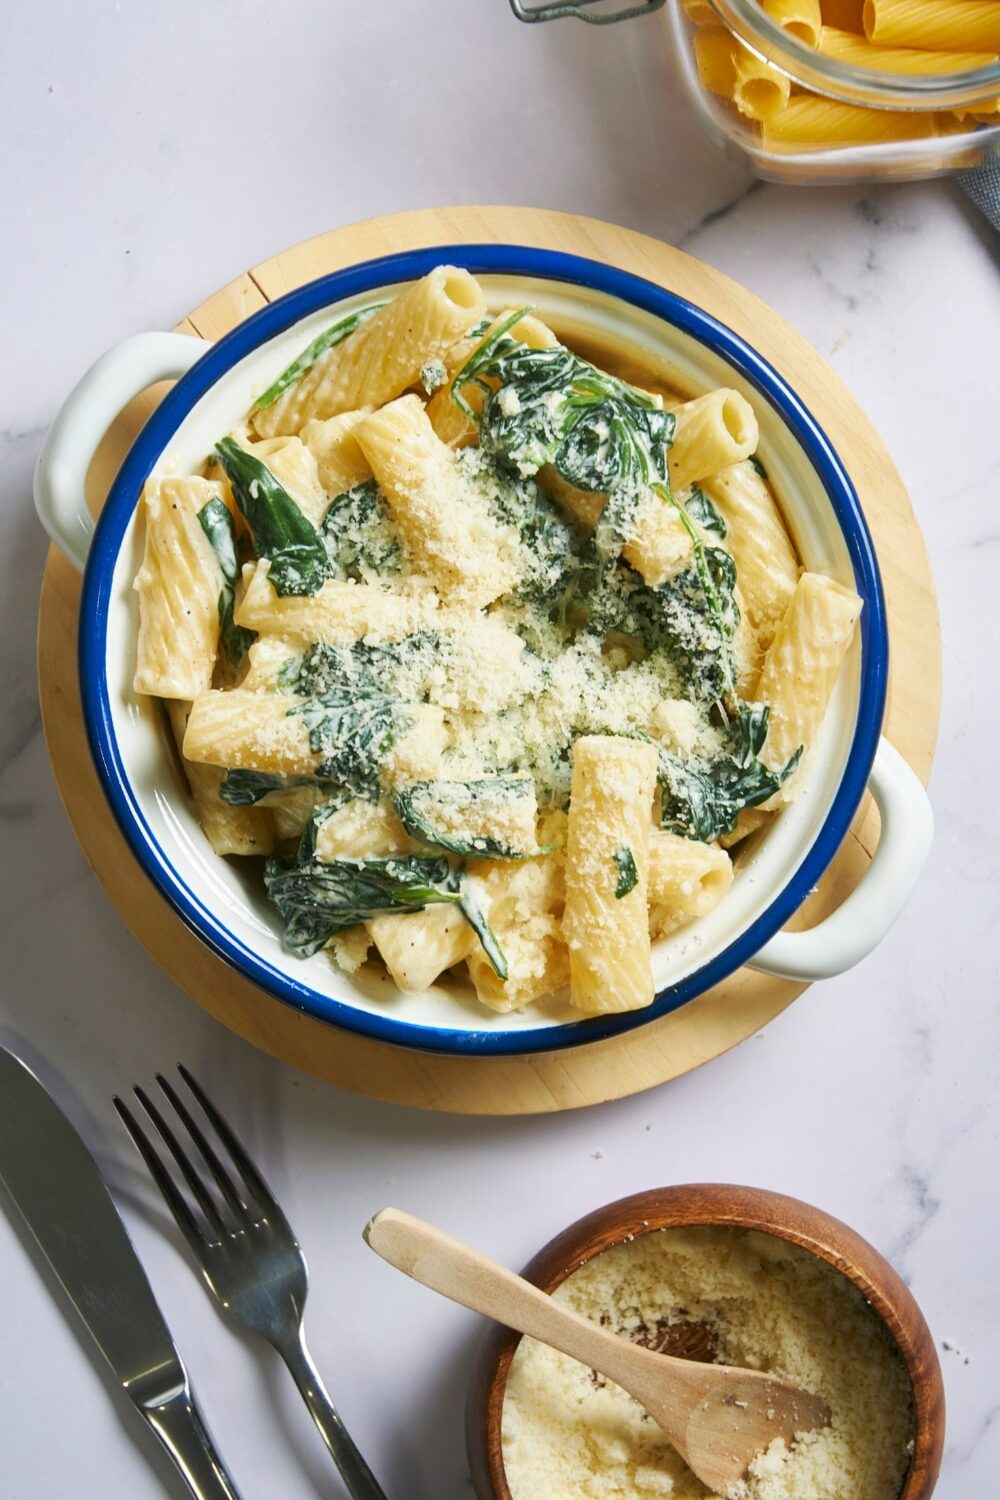 An overhead view of a bowl with spinach pasta topped with parmesan cheese. The bowl is placed on a wooden serving plate.